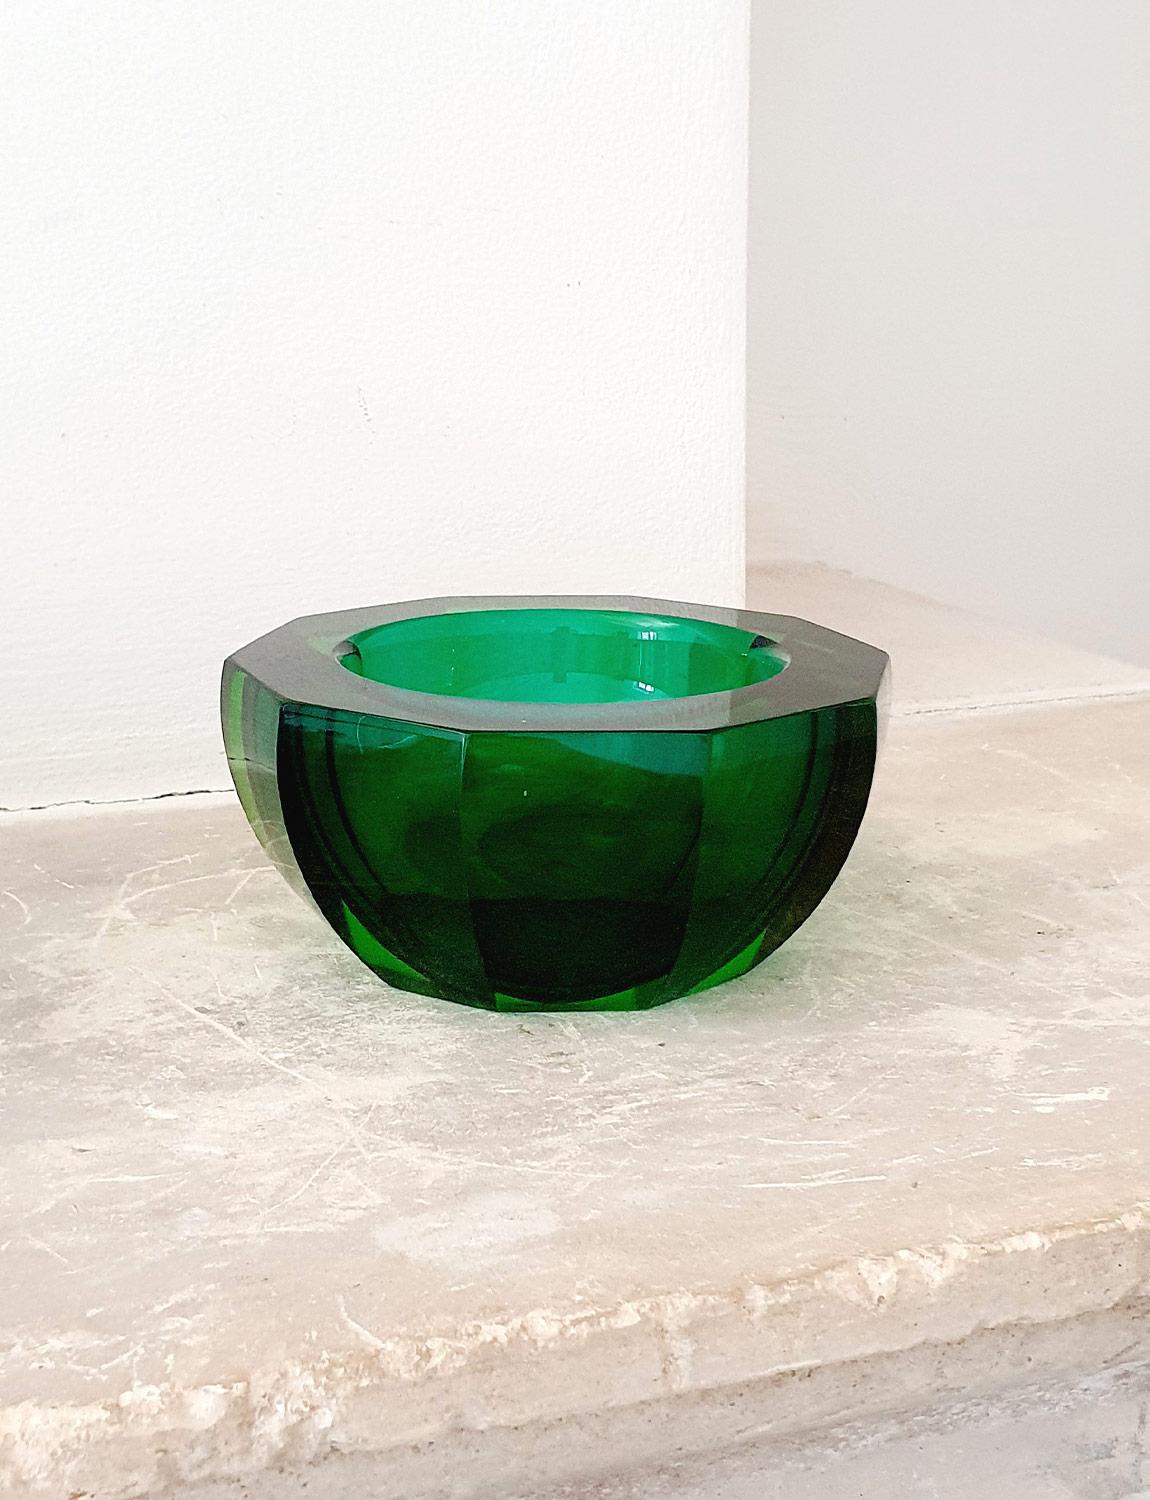 Still sporting its original Murano glass sticker on the base, this beautiful deep green large hand-blown bowl is in excellent condition. This deep green is particularly sought over and the size and shape of this piece make it a particularly special